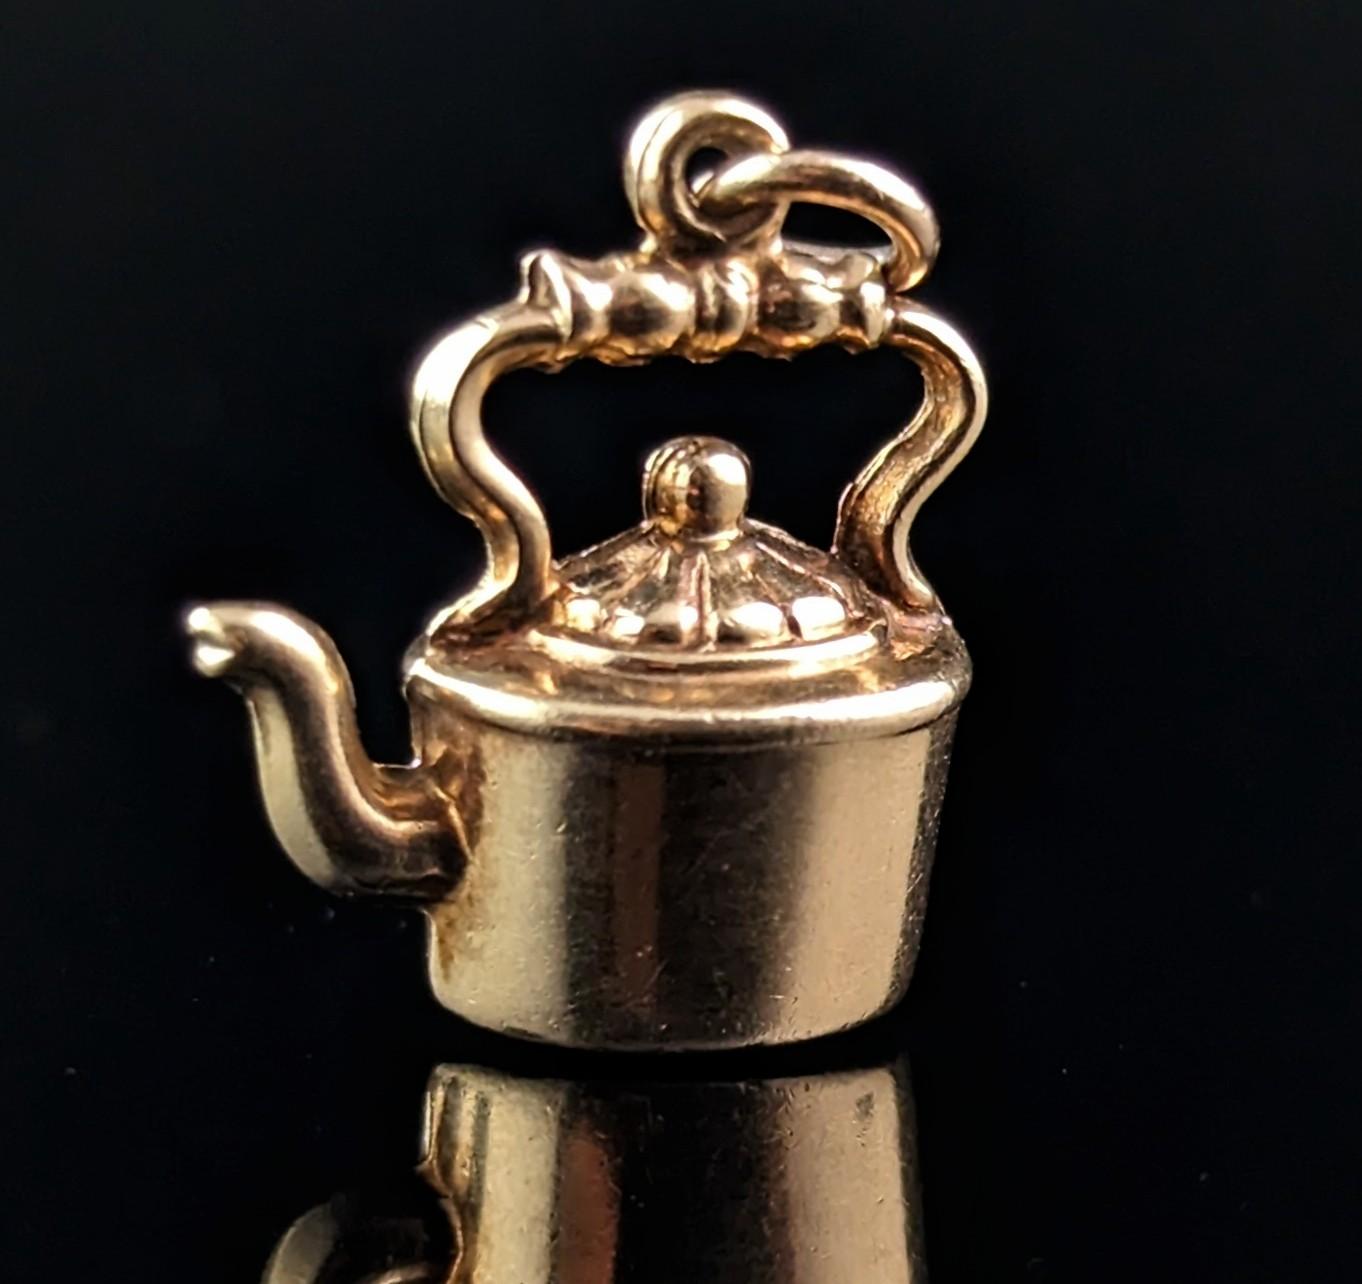 This little novelty vintage 9ct gold charm or pendant really has so much going on in such a small package.

It is finely modelled in rich 9ct yellow gold as a little Victorian style kettle, one that sits atop a stove.

The charm is a mid-century